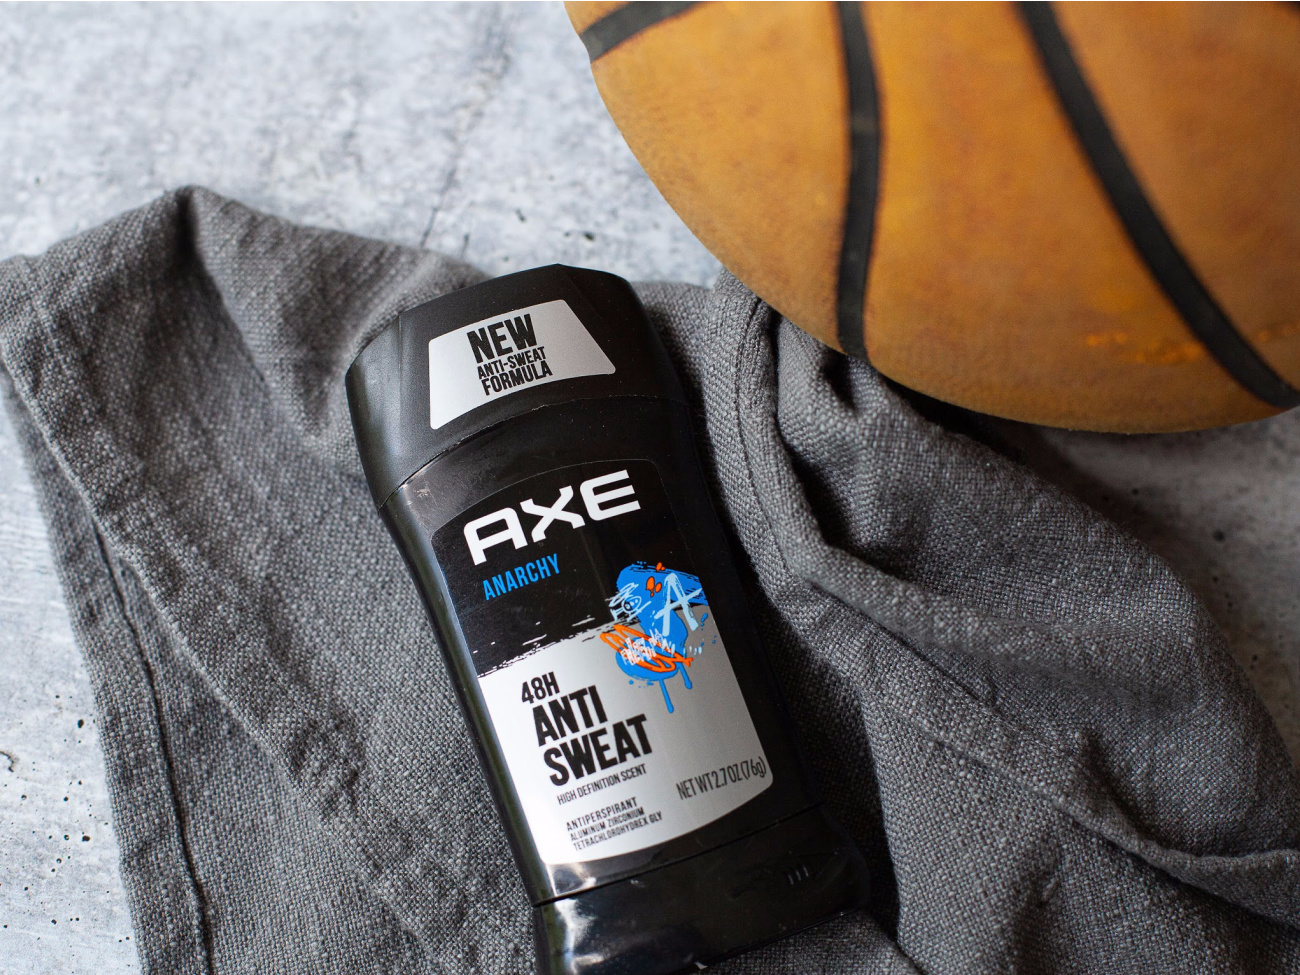 Get Axe Deodorant As Low As $2.99 At Kroger – Almost Half Price